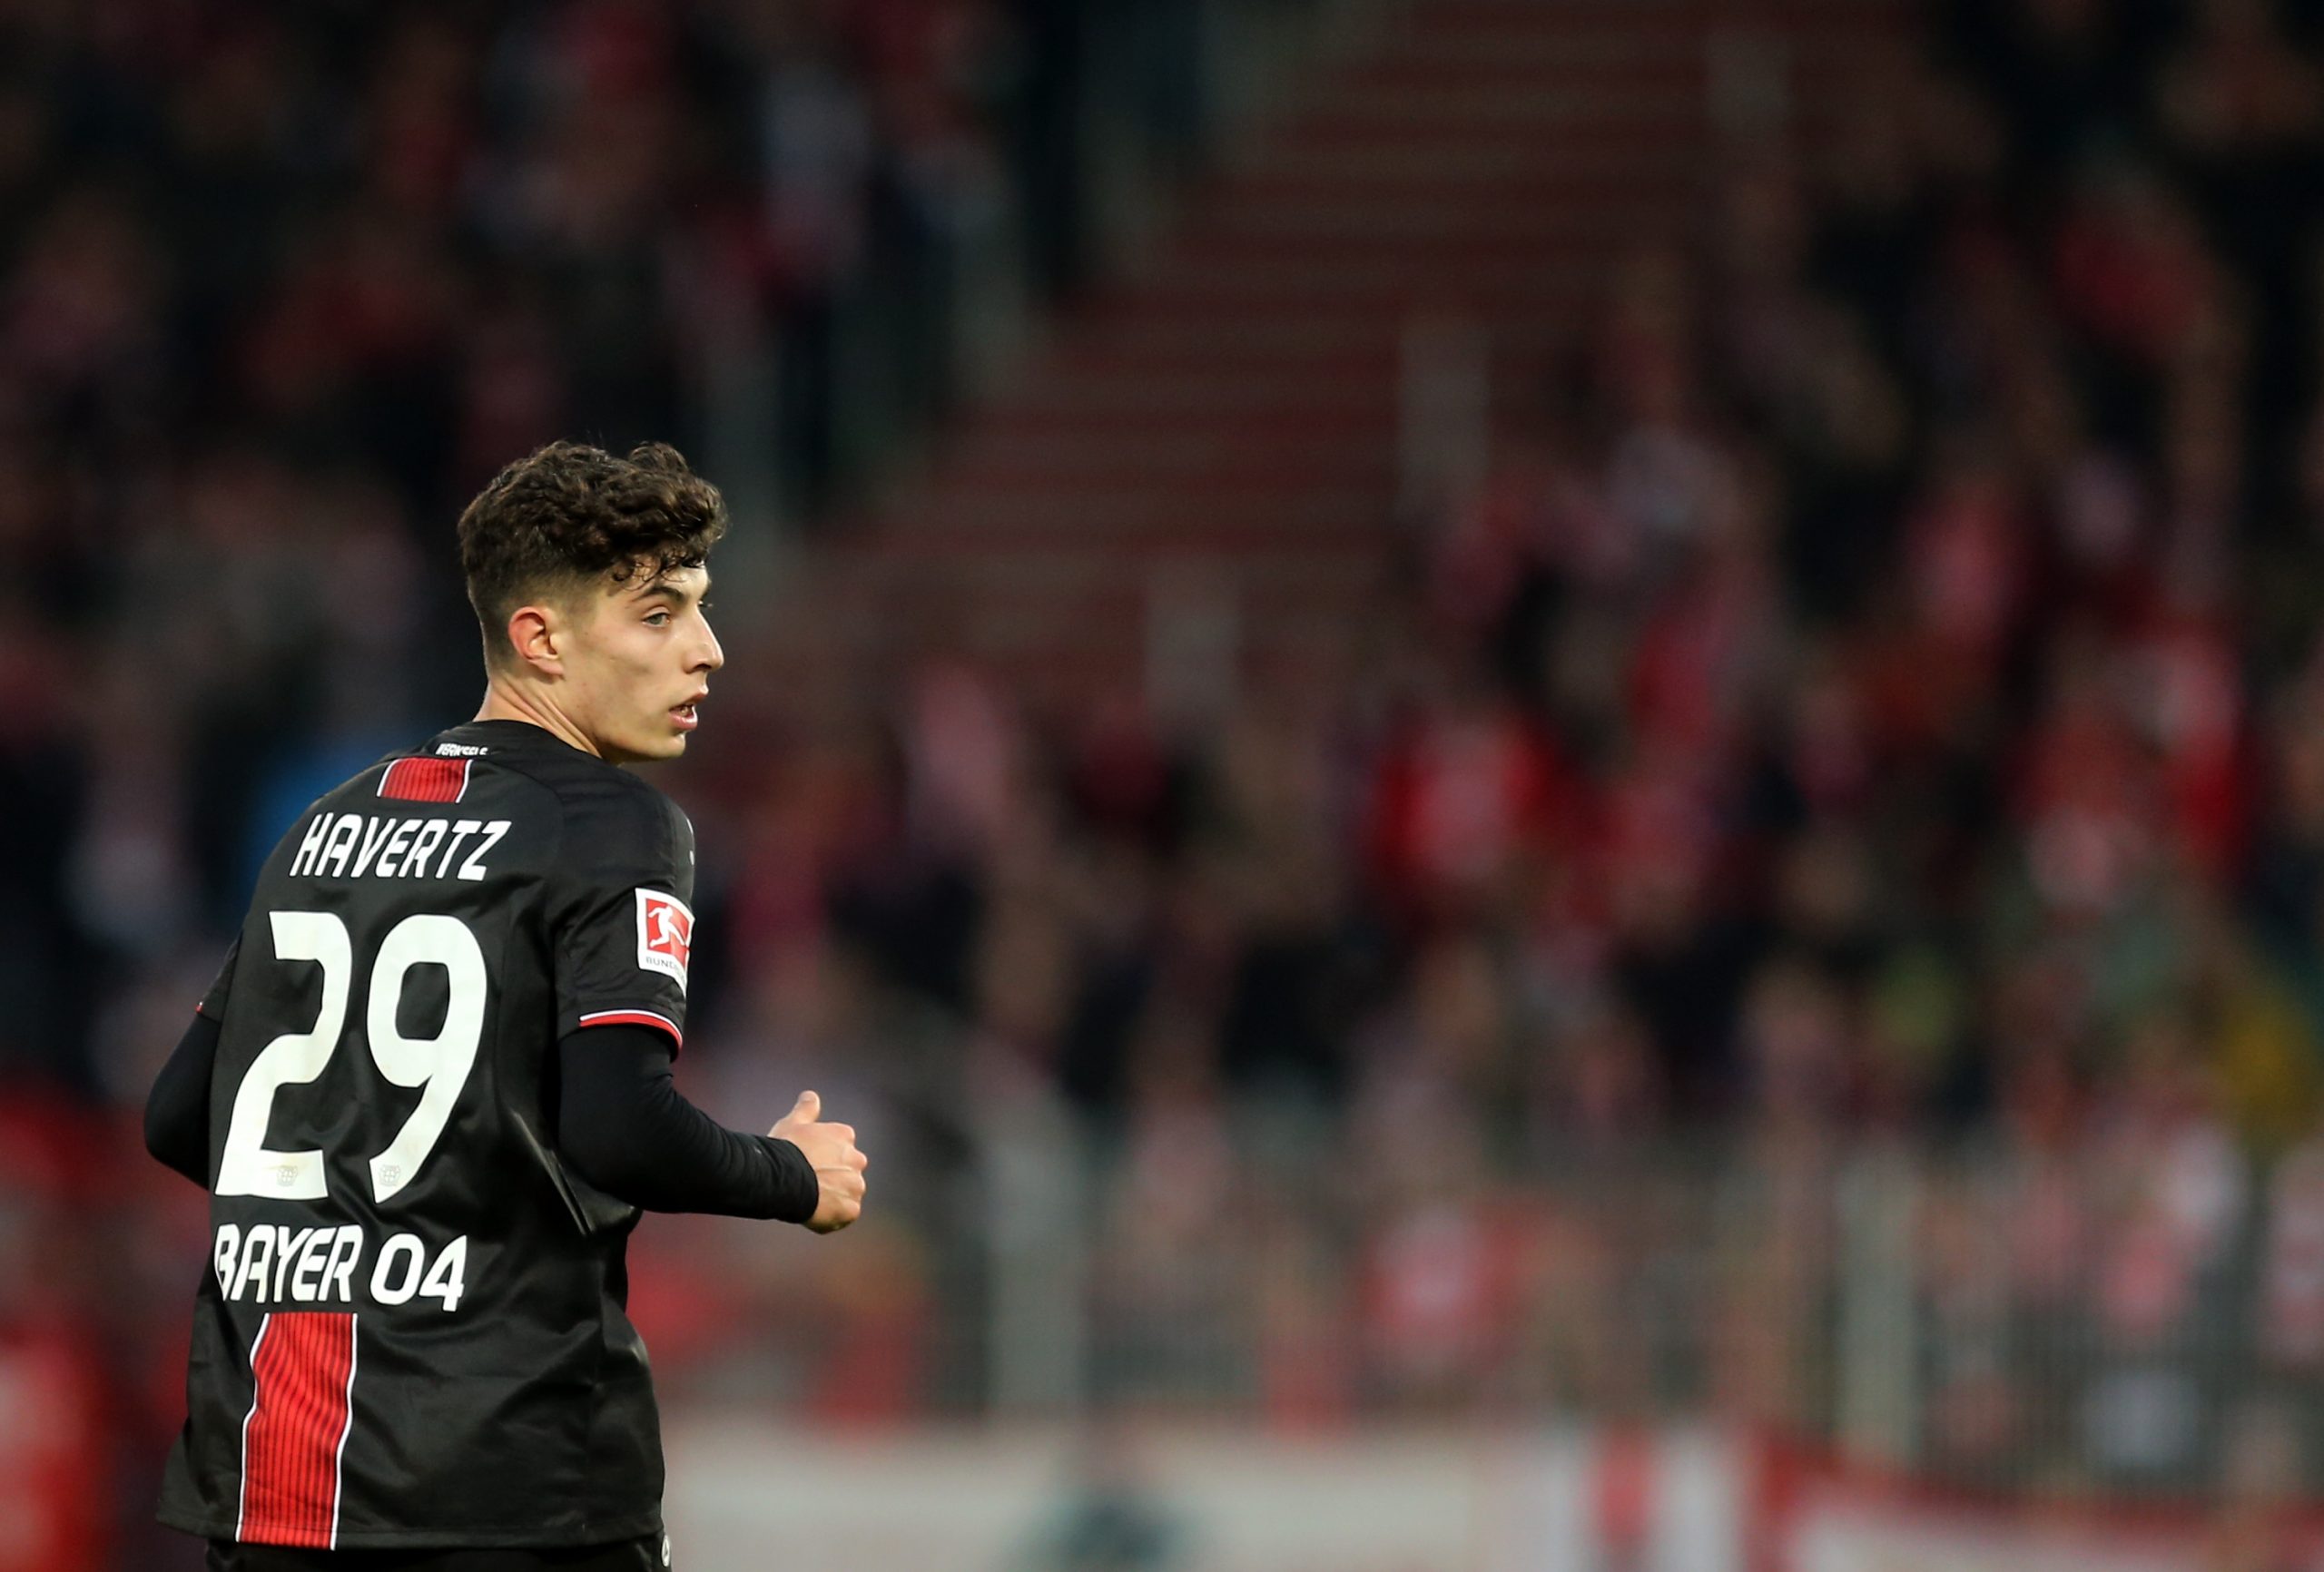 Coutinho Loses Favour with Chelsea, Havertz Preferred Now